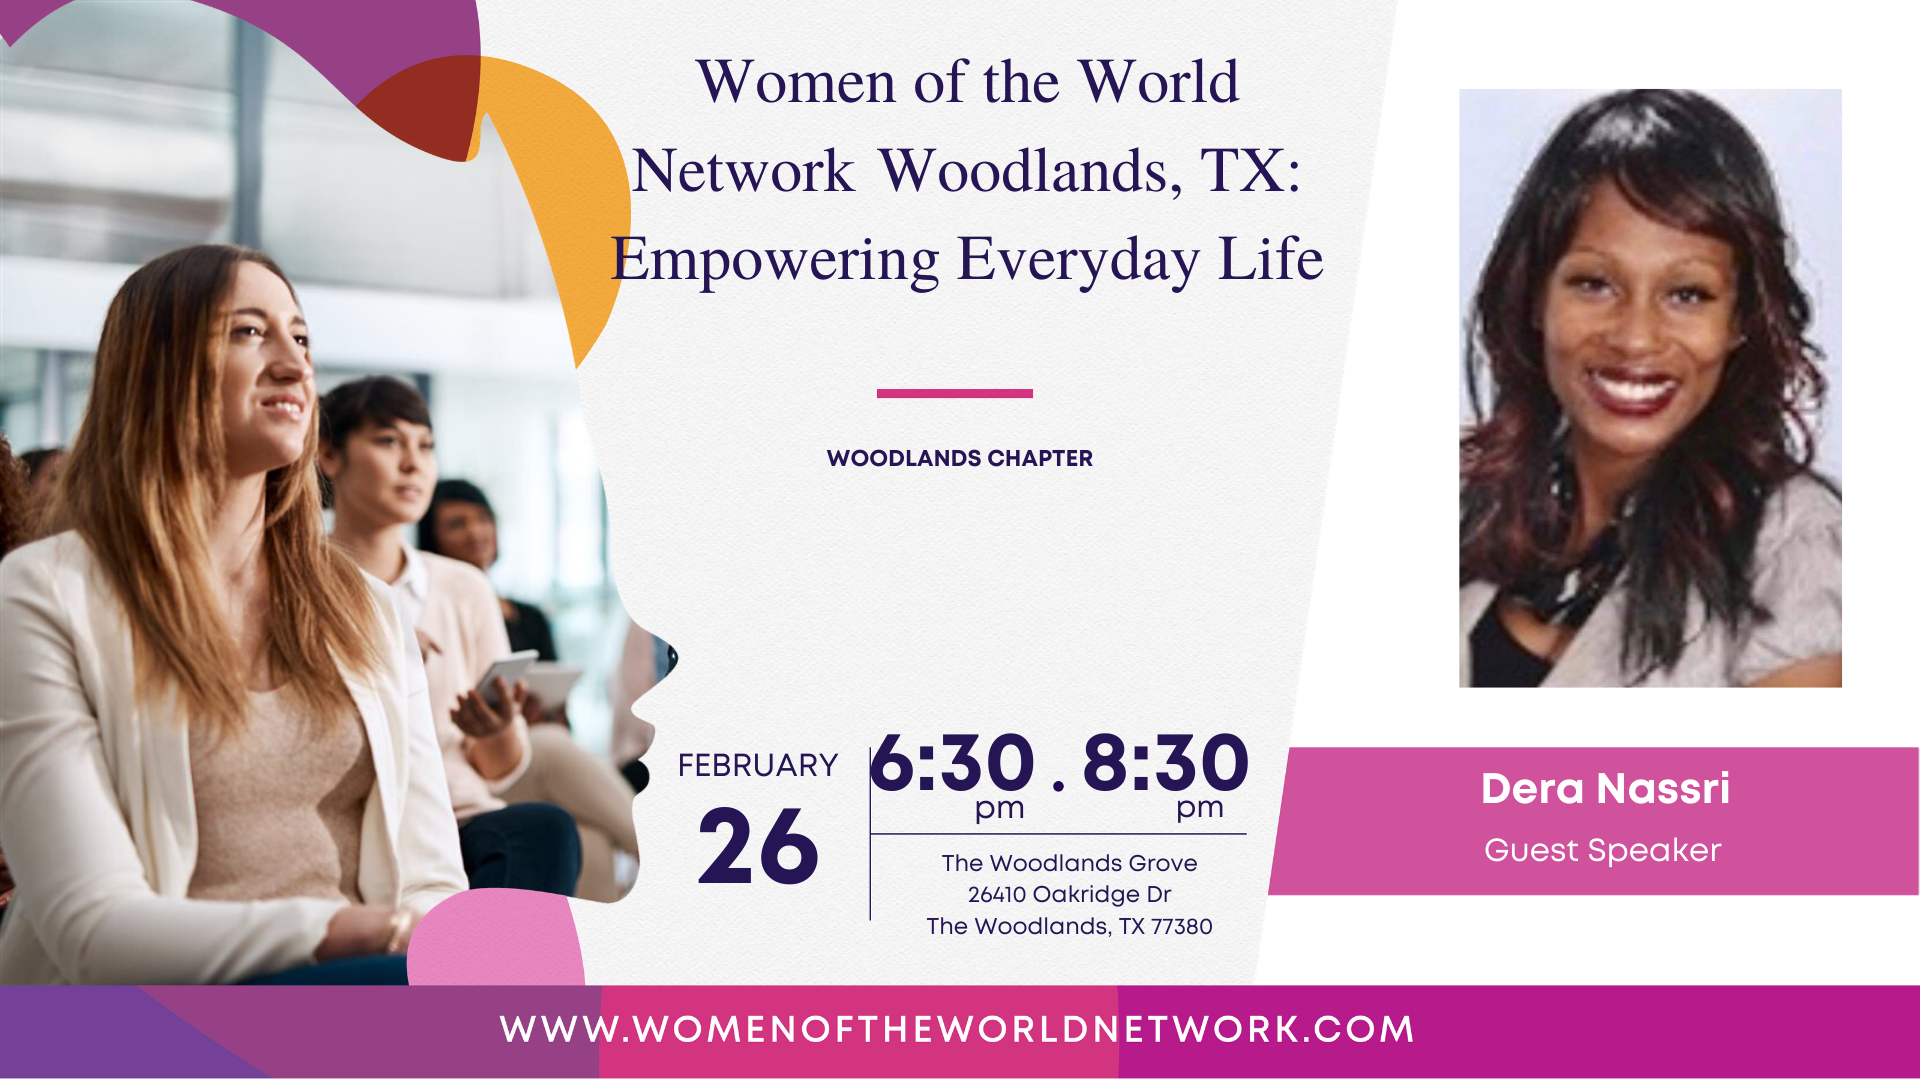 Women of the World Network Woodlands, TX: Empowering Everyday Lives